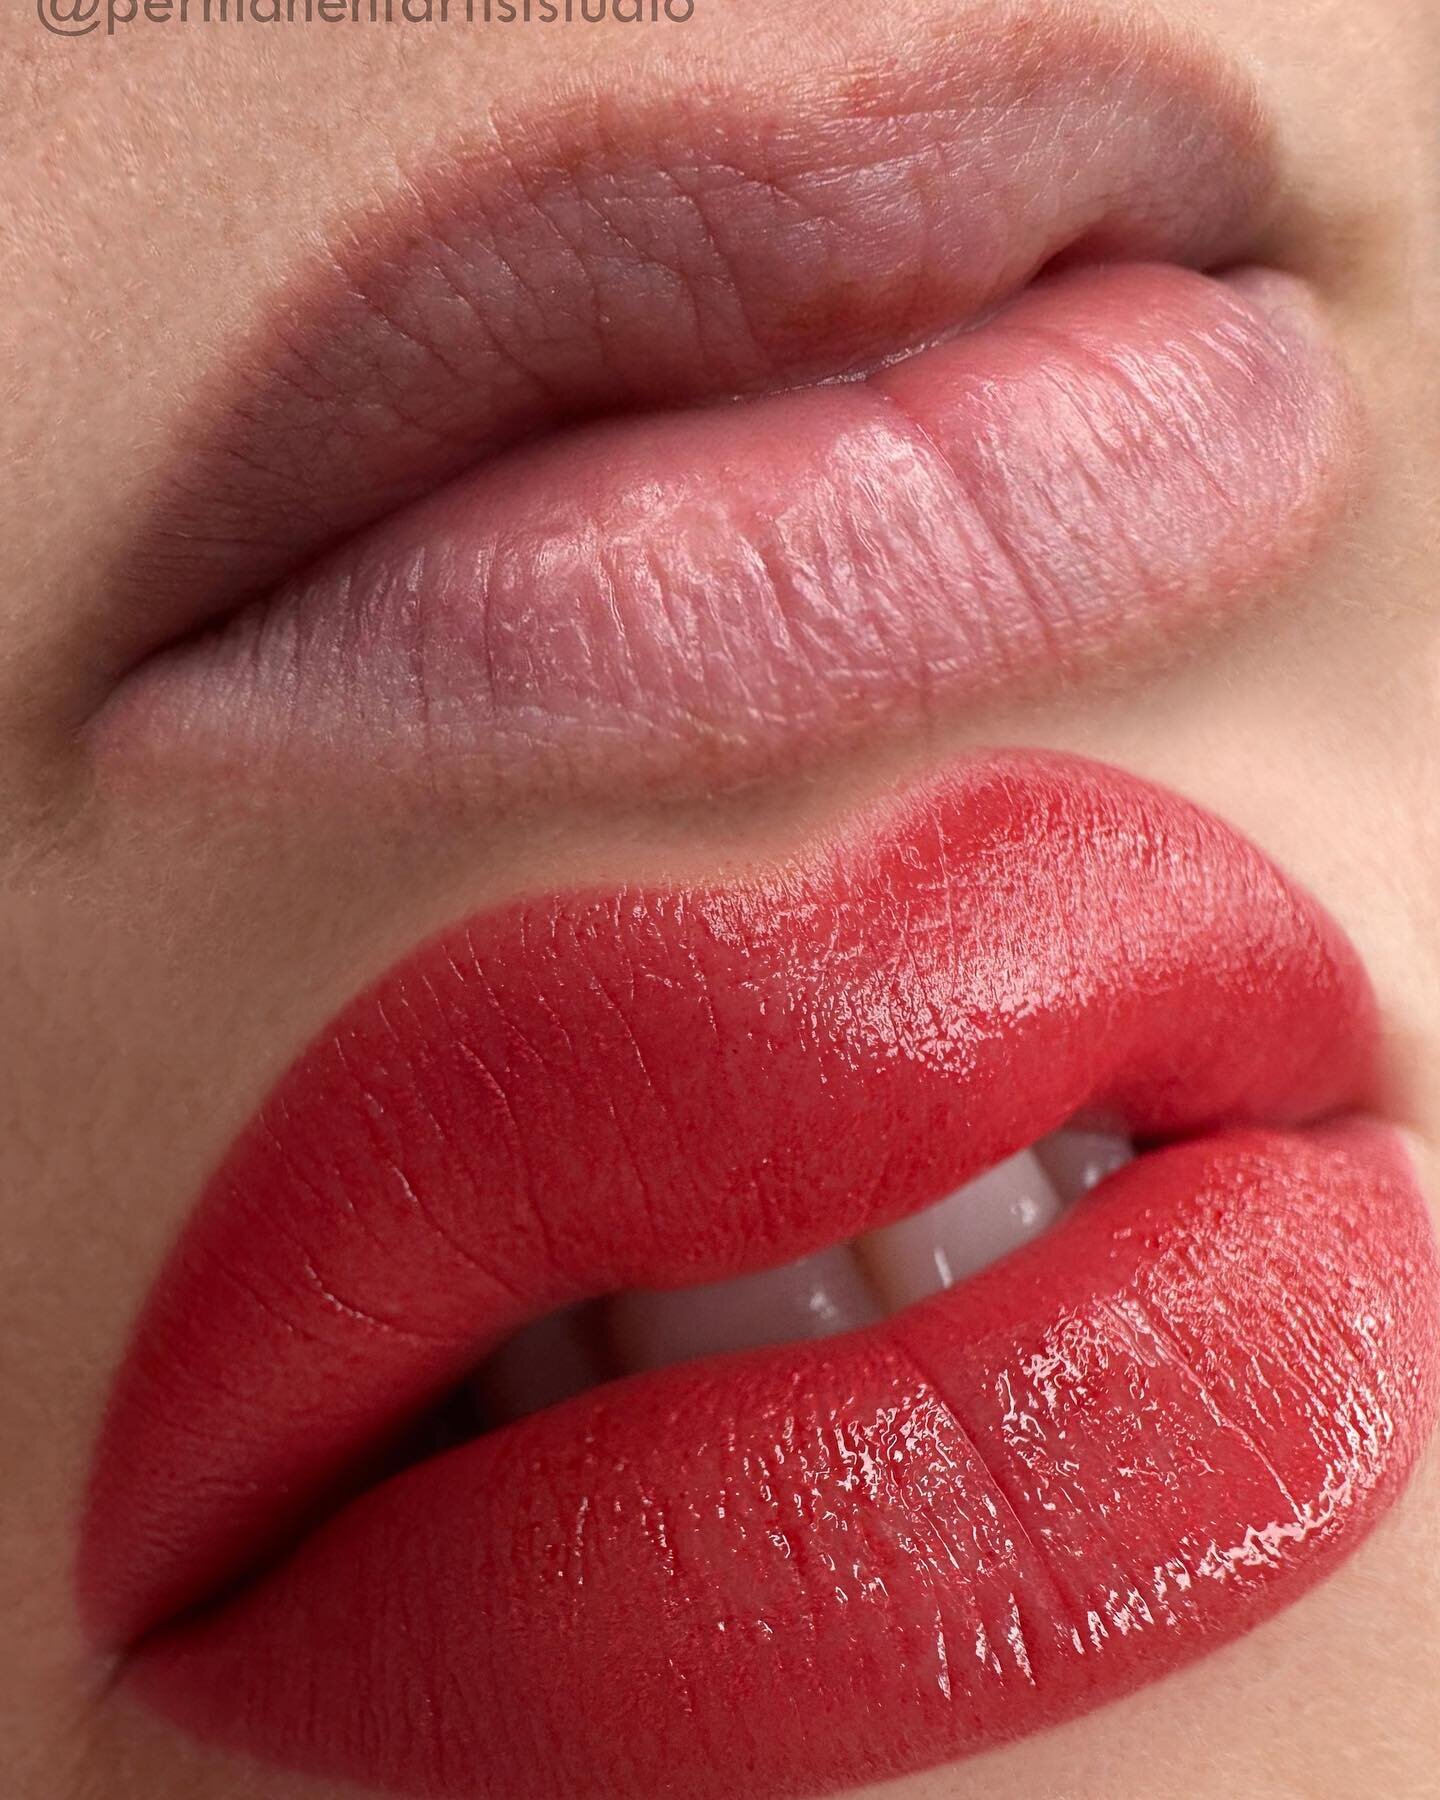 Lip blush healing process 💋

It is very important to follow aftercare rules that I will give after the procedure. Lip Blush Aftercare directly impacts how your lips will look at the end of the healing process. 
For most people, the initial visible h